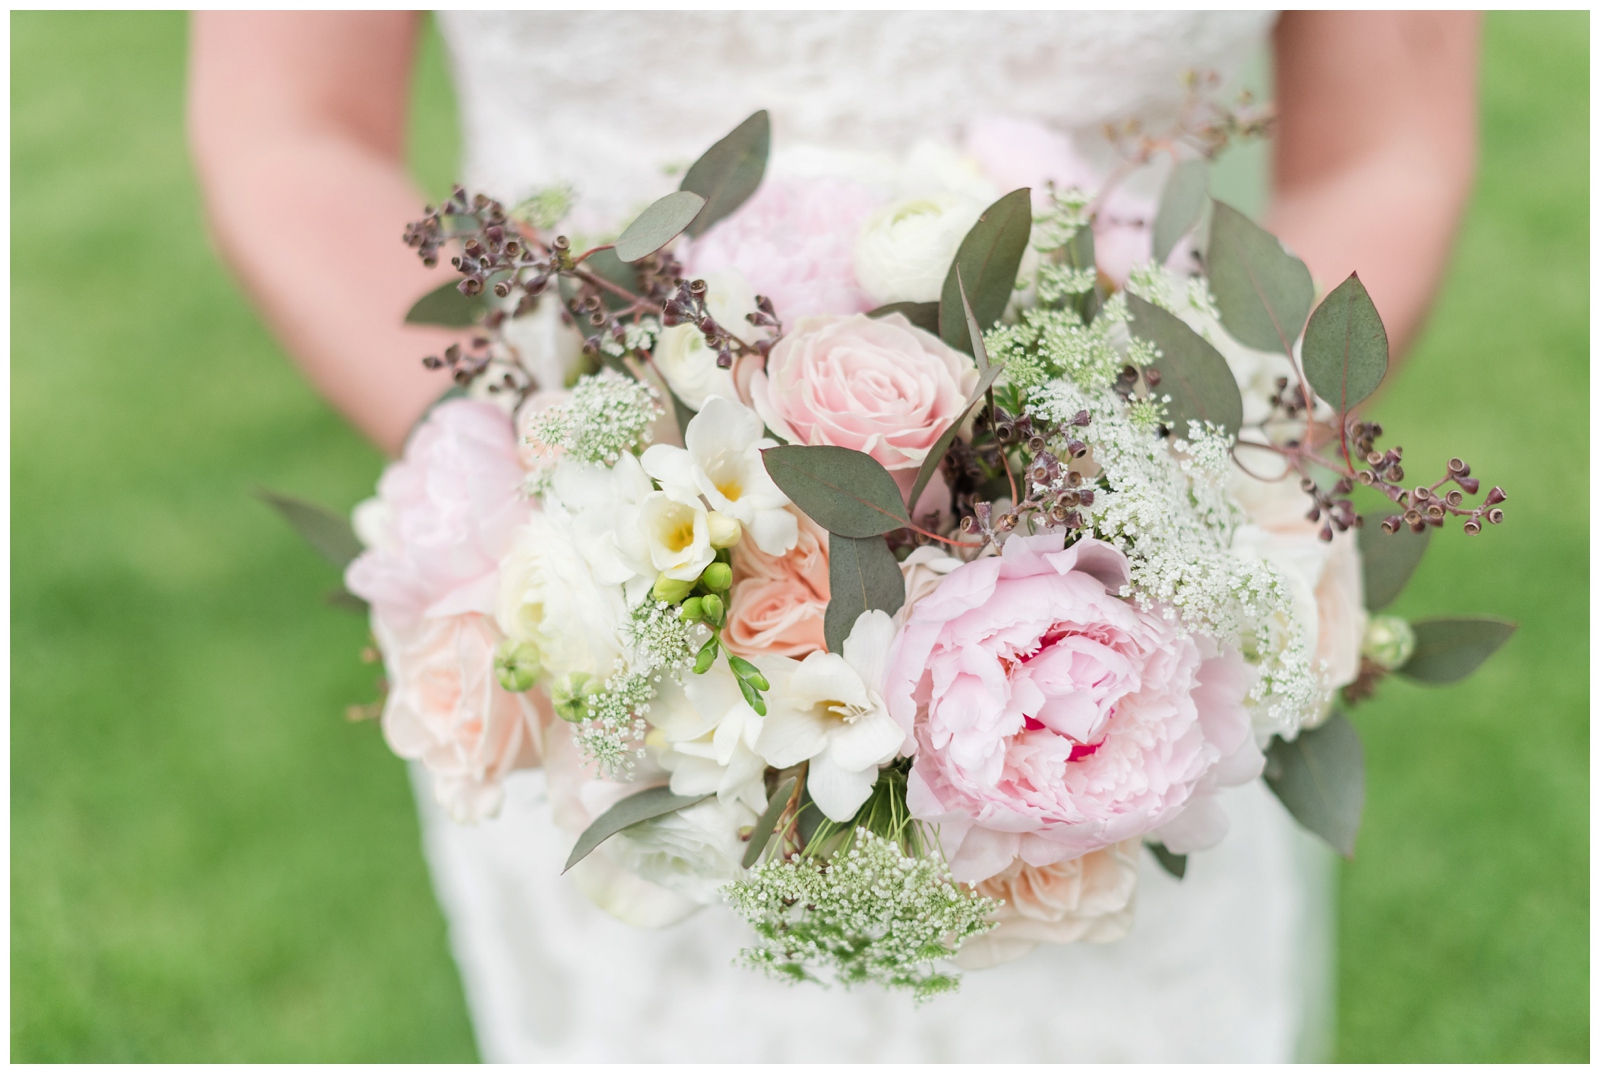 wedding bouquet with pink peonies, pink roses, and white flowers plus greenery by Madison House Designs